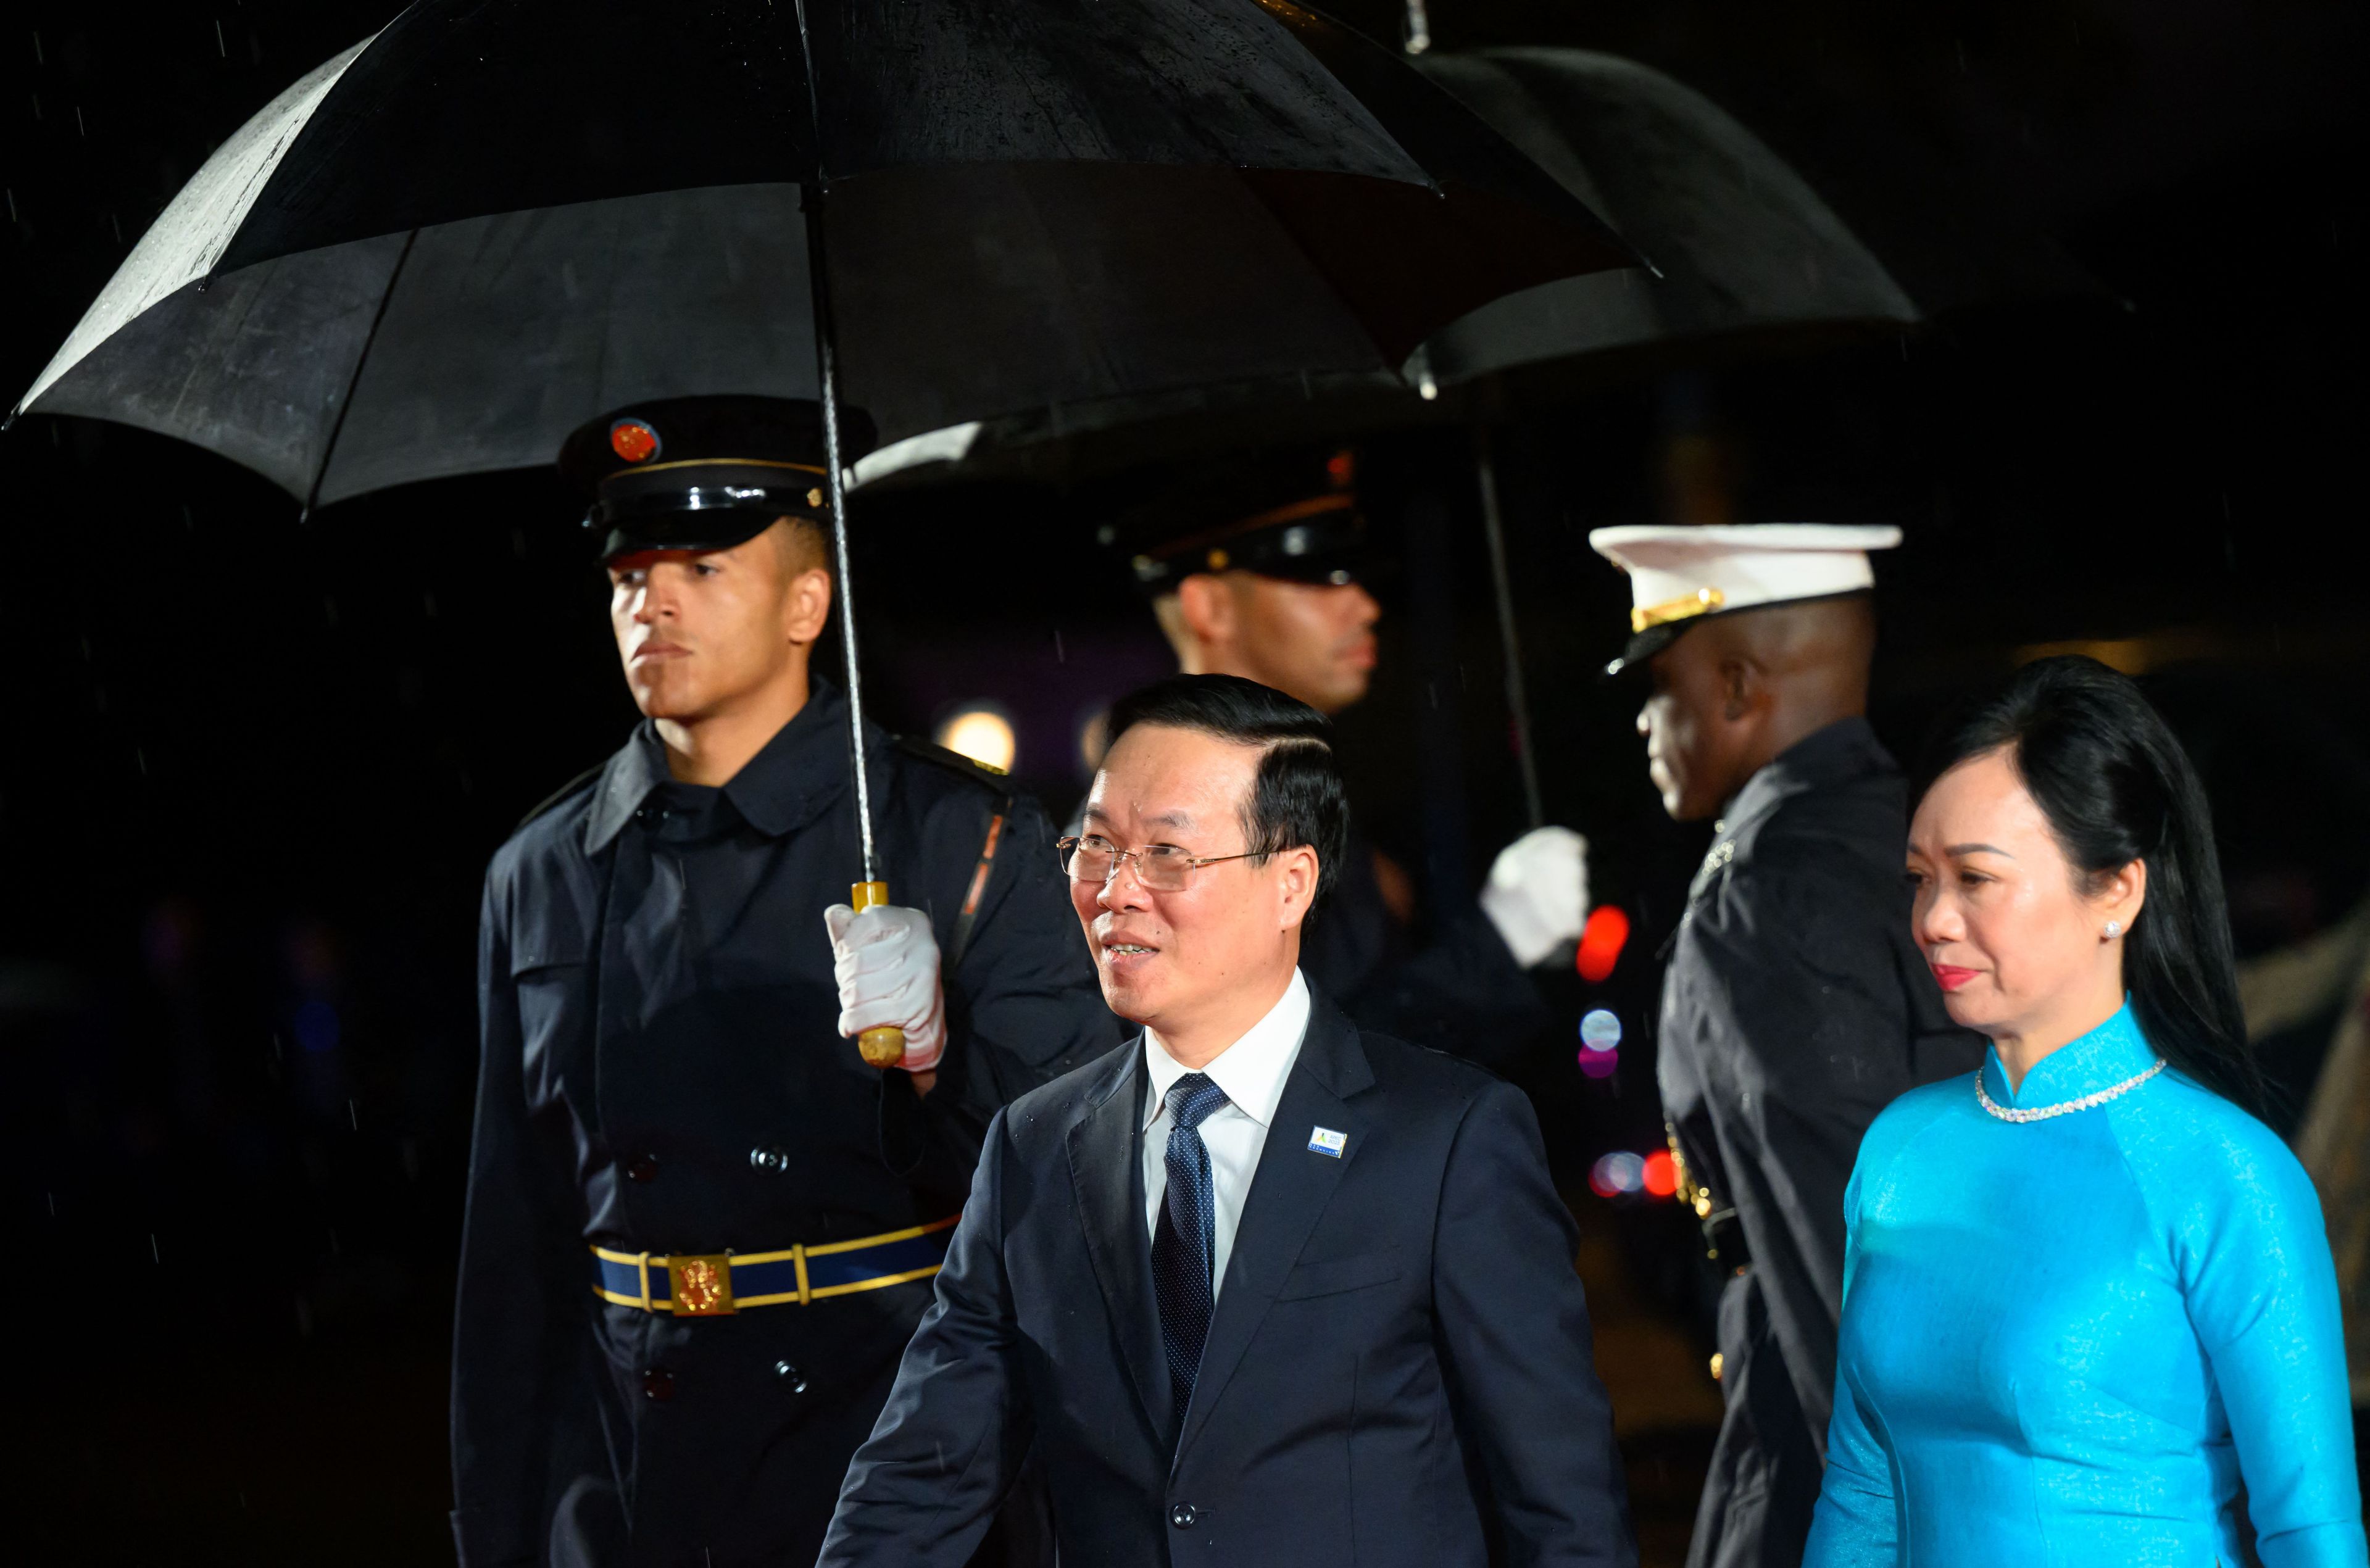 Vietnam's President Vo Van Thuong and his spouse Phan Thi Thanh Tam, dressed in formal wear walks between members of security personnel.